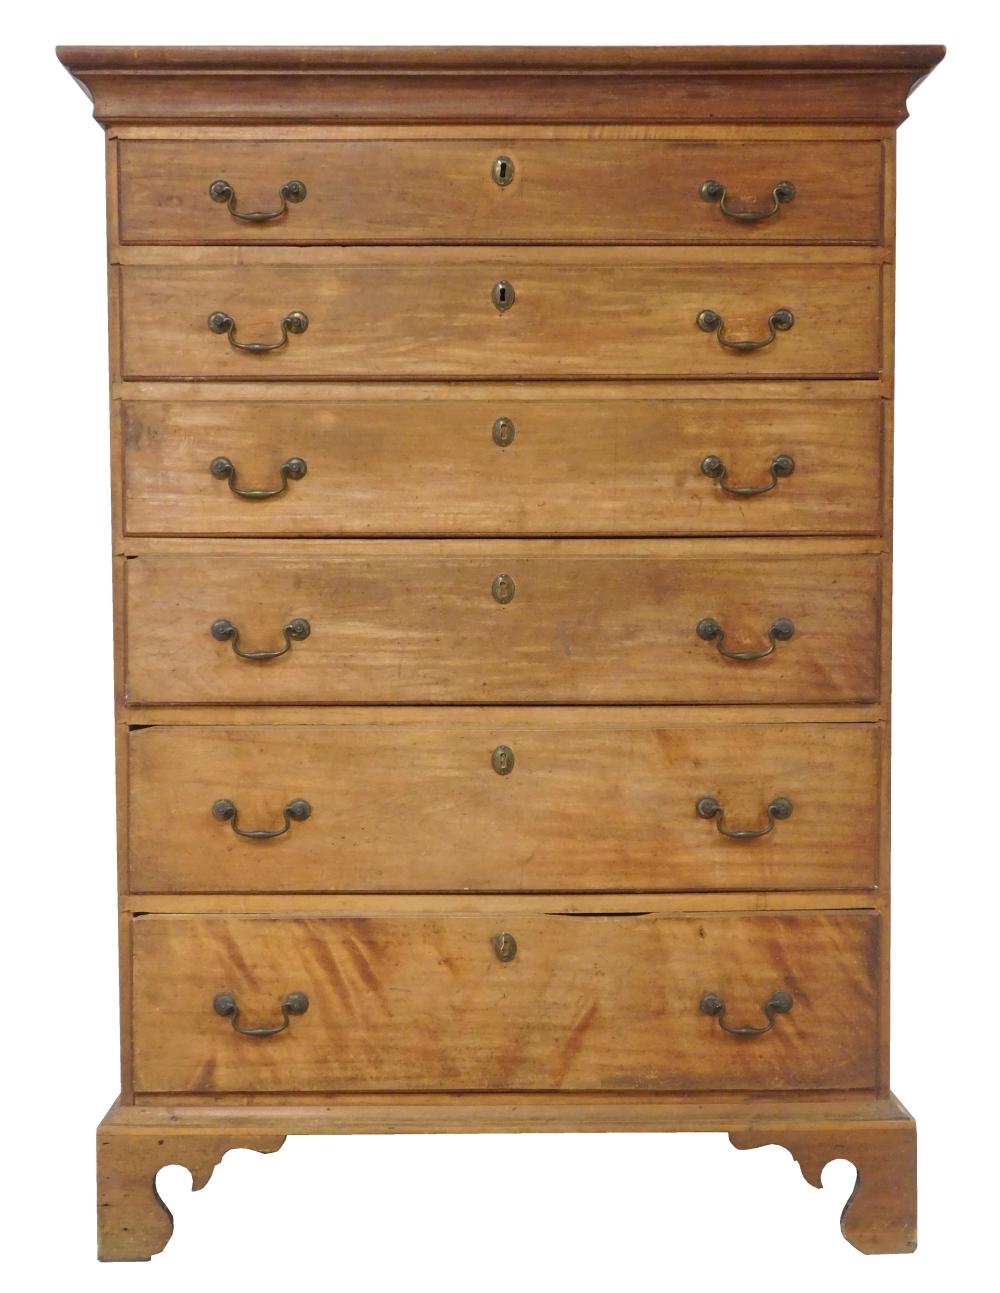 TALL CHEST OF DRAWERS, LATE 18TH